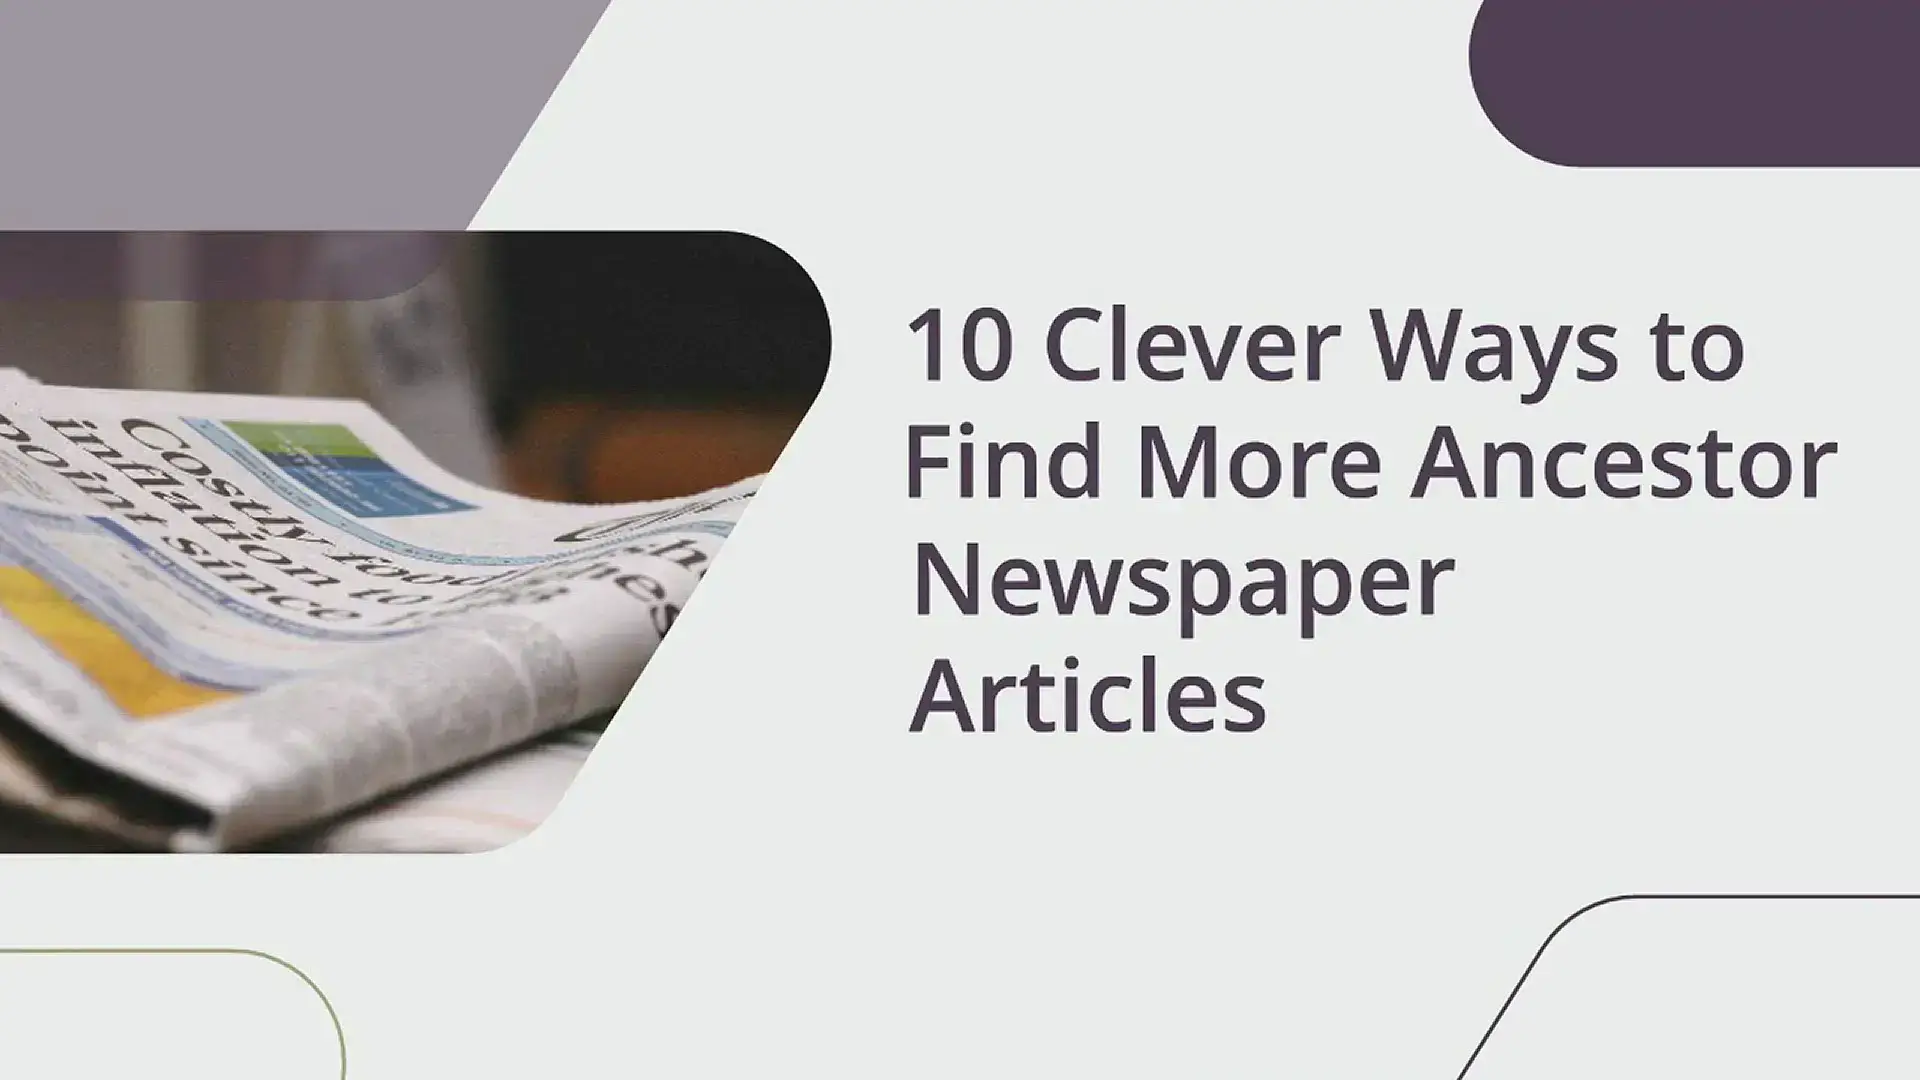 'Video thumbnail for 10 Clever Ways to Find More Ancestor Newspaper Articles'